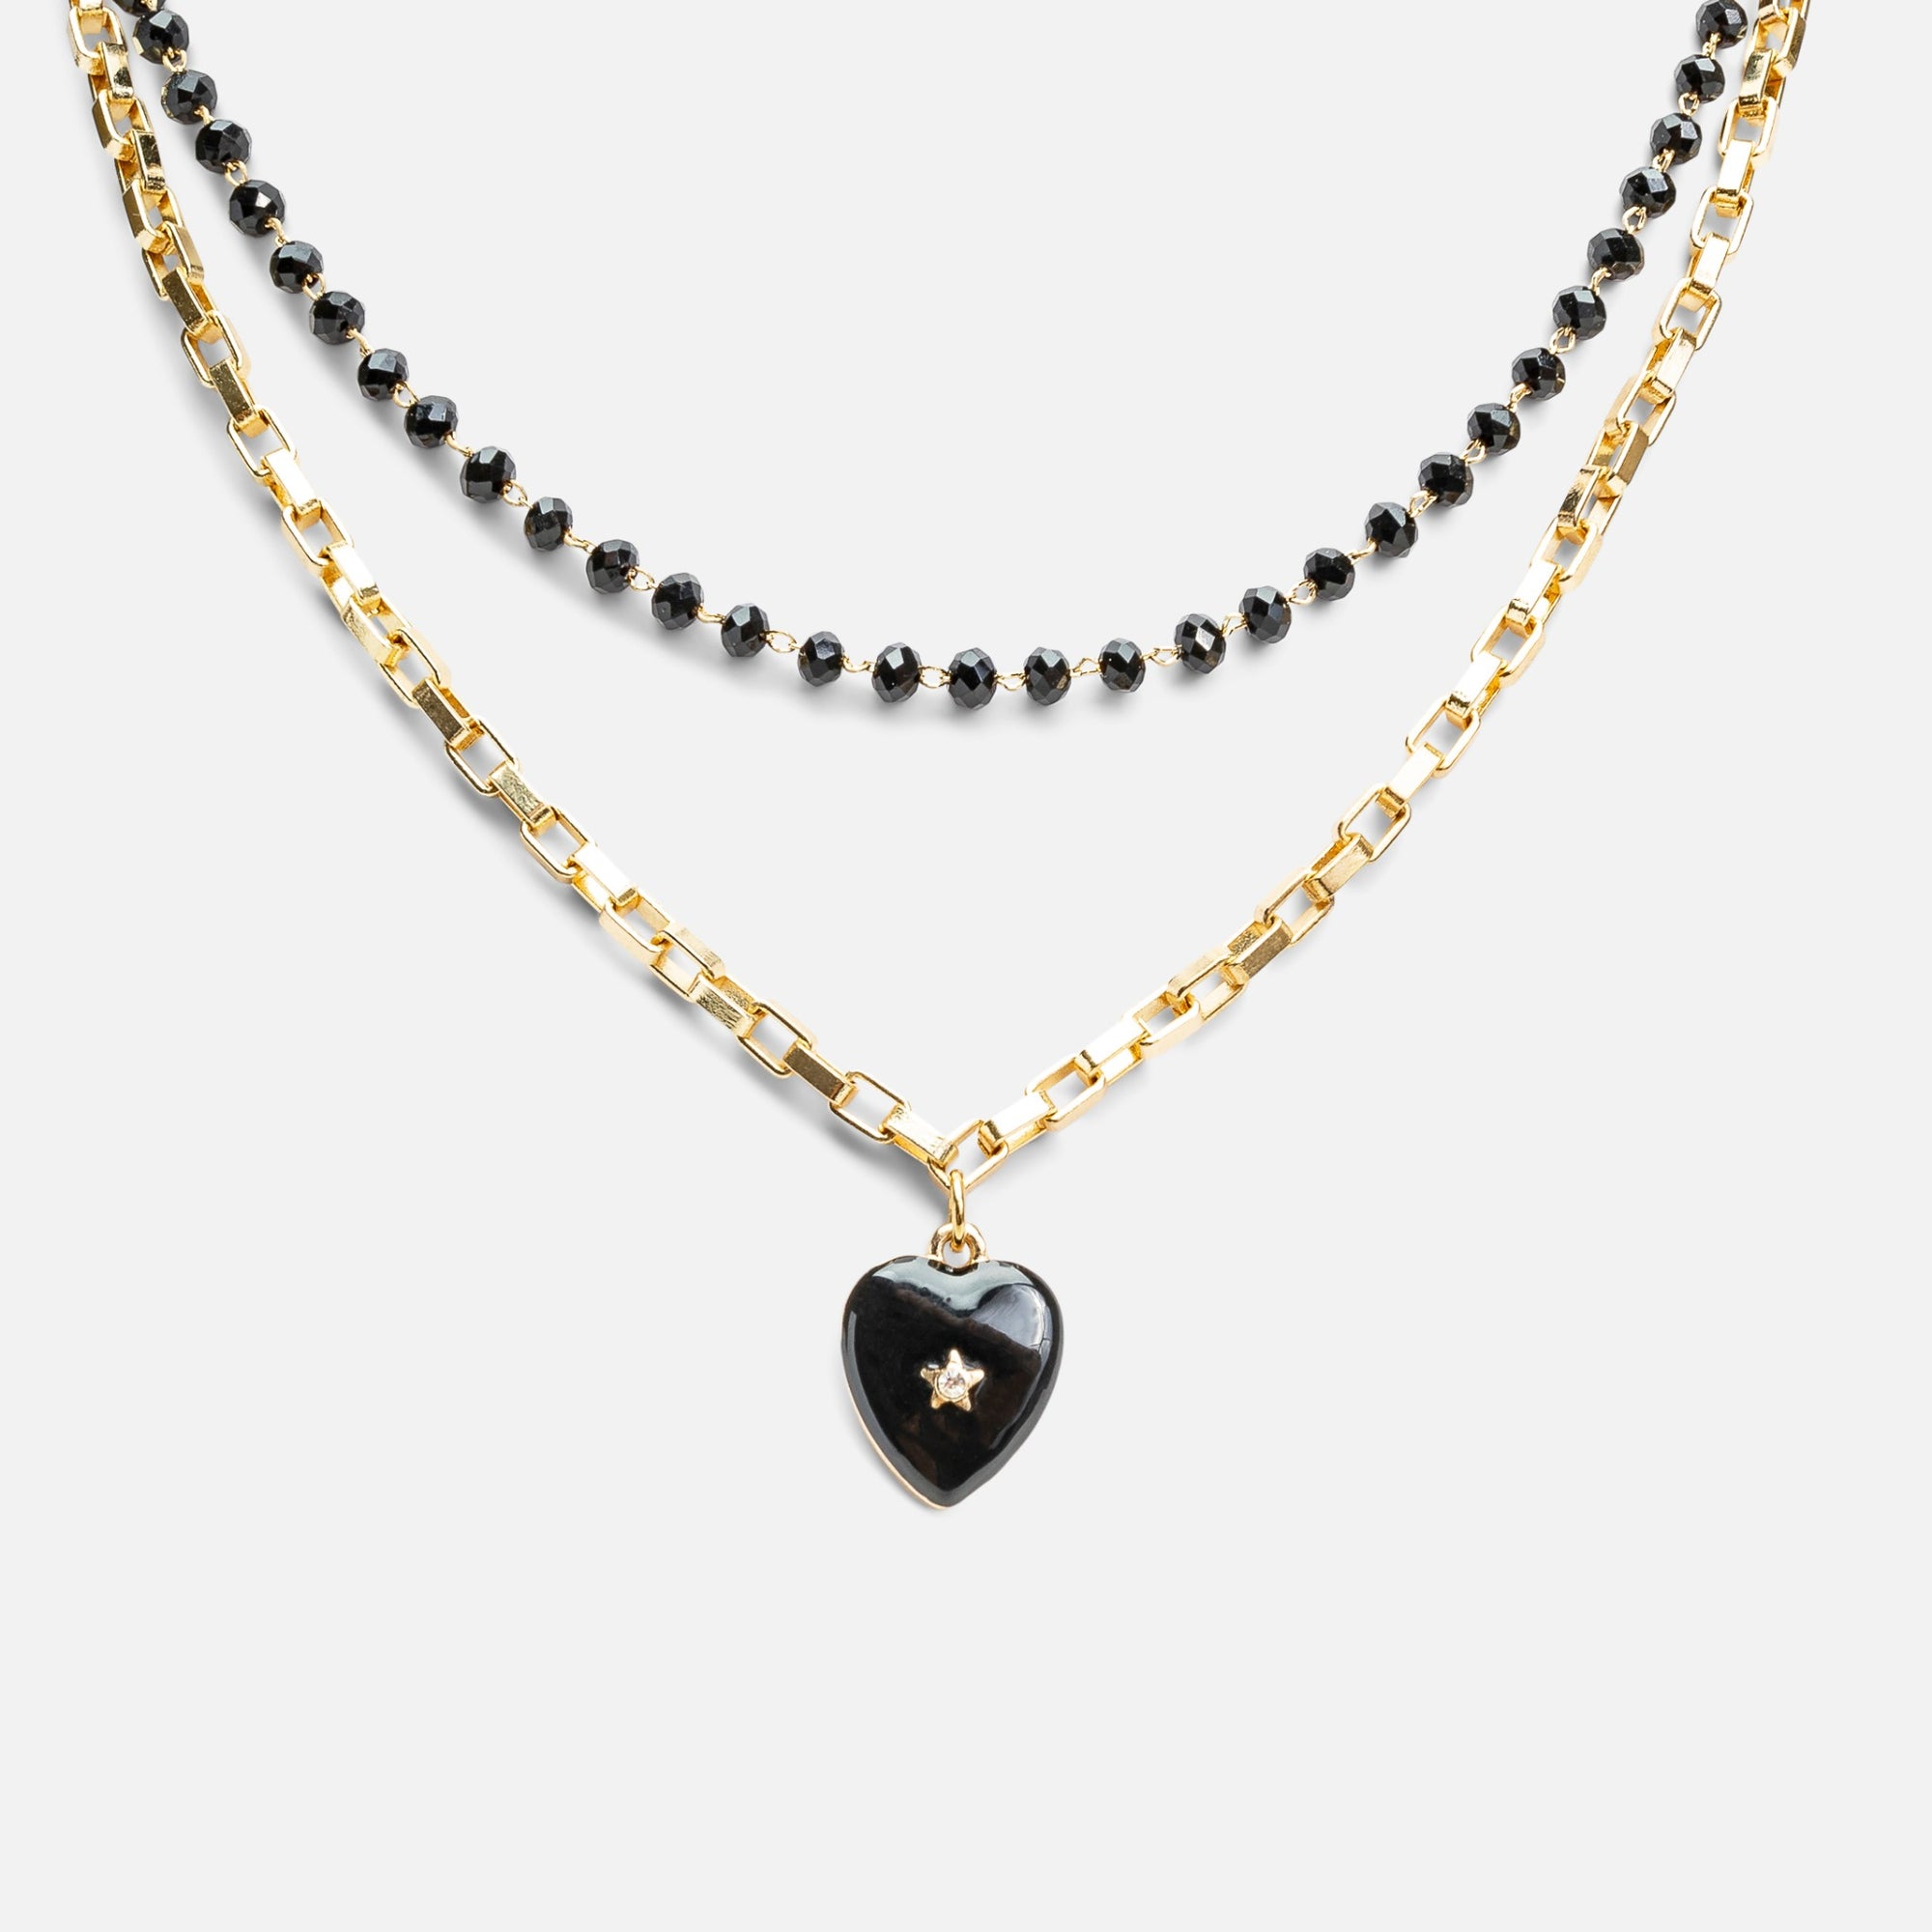 Double row necklace with black heart charm 